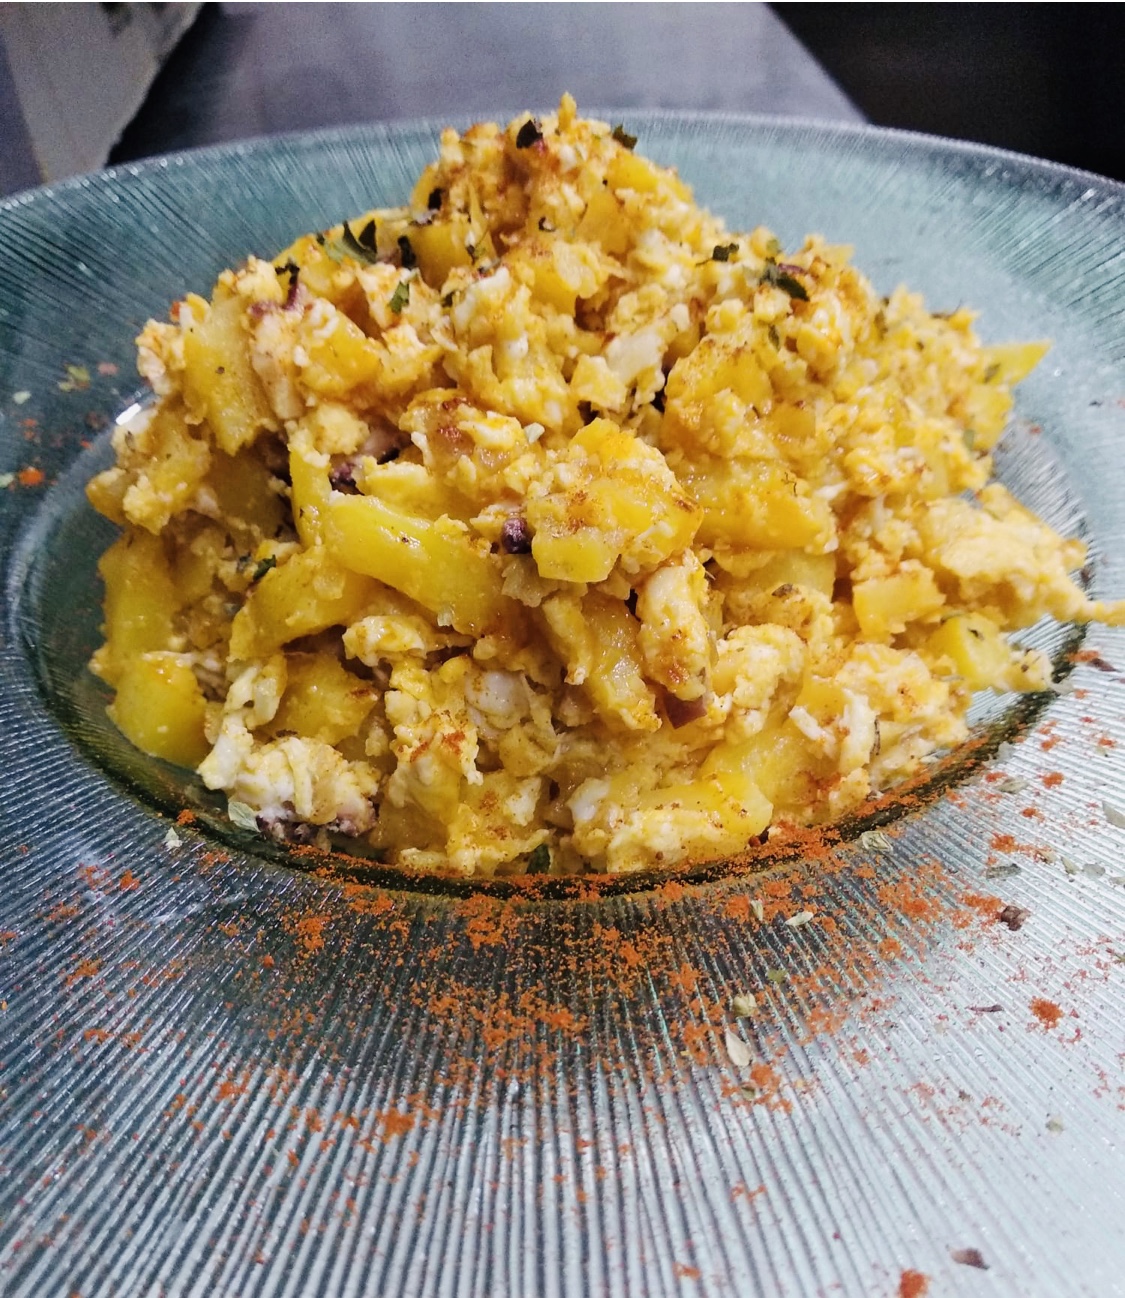 Scrambled Egg with Octopus and Caramelized Onion